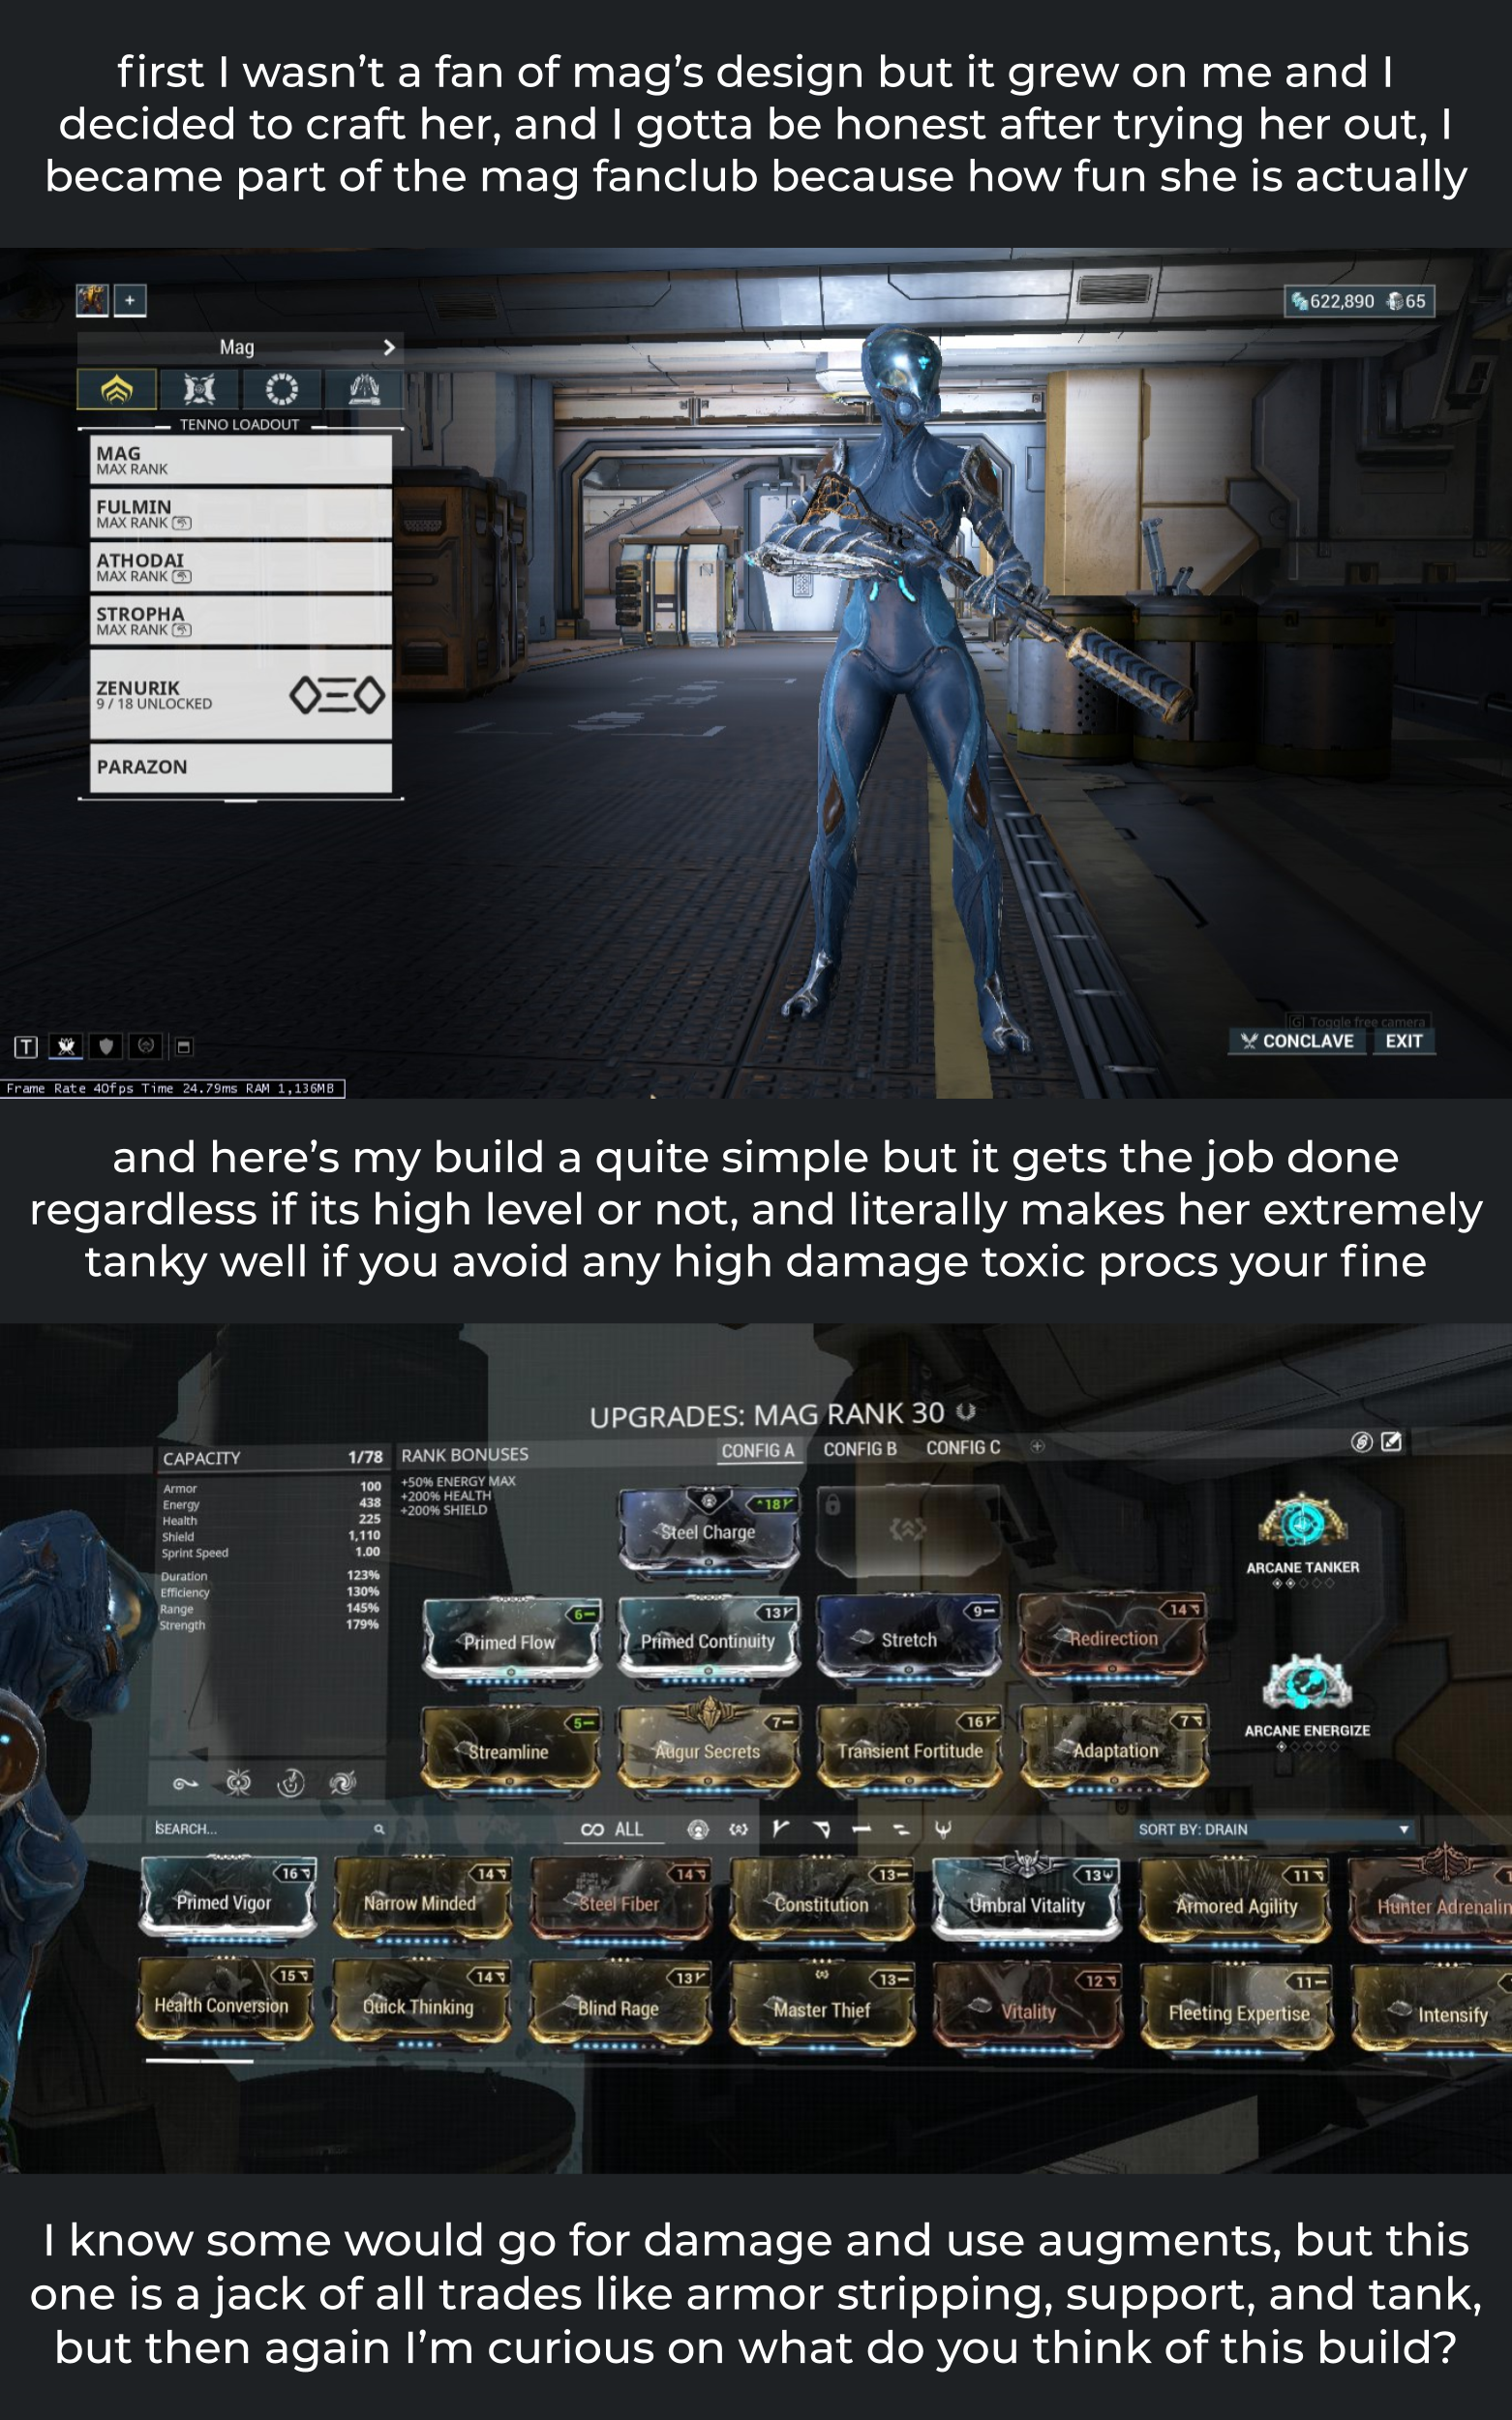 How Do I Get skill? - Page 2 - General Discussion - Warframe Forums